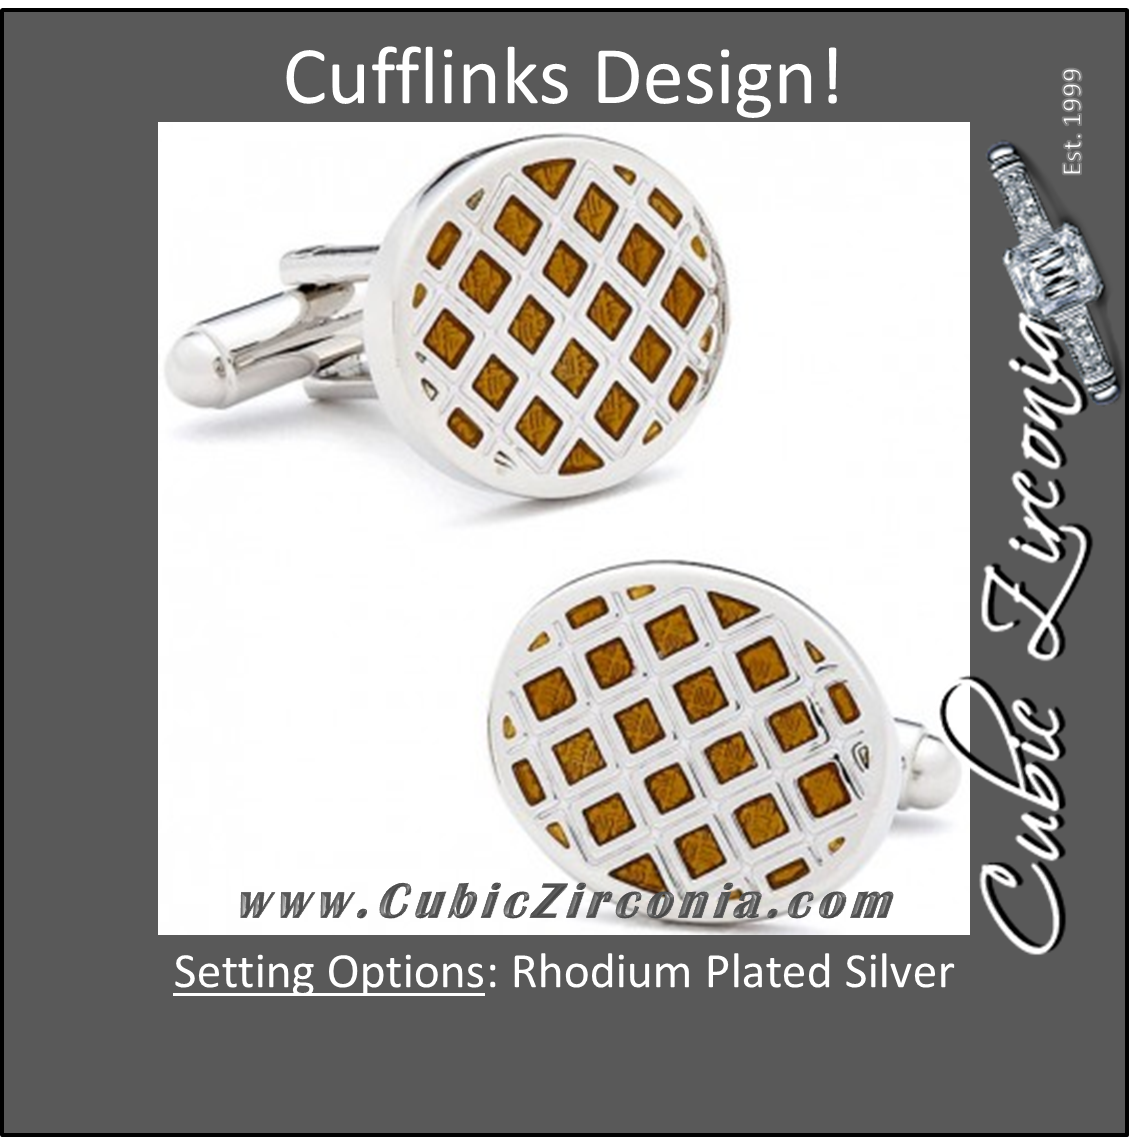 Men’s Cufflinks- Amber Quilted Circles